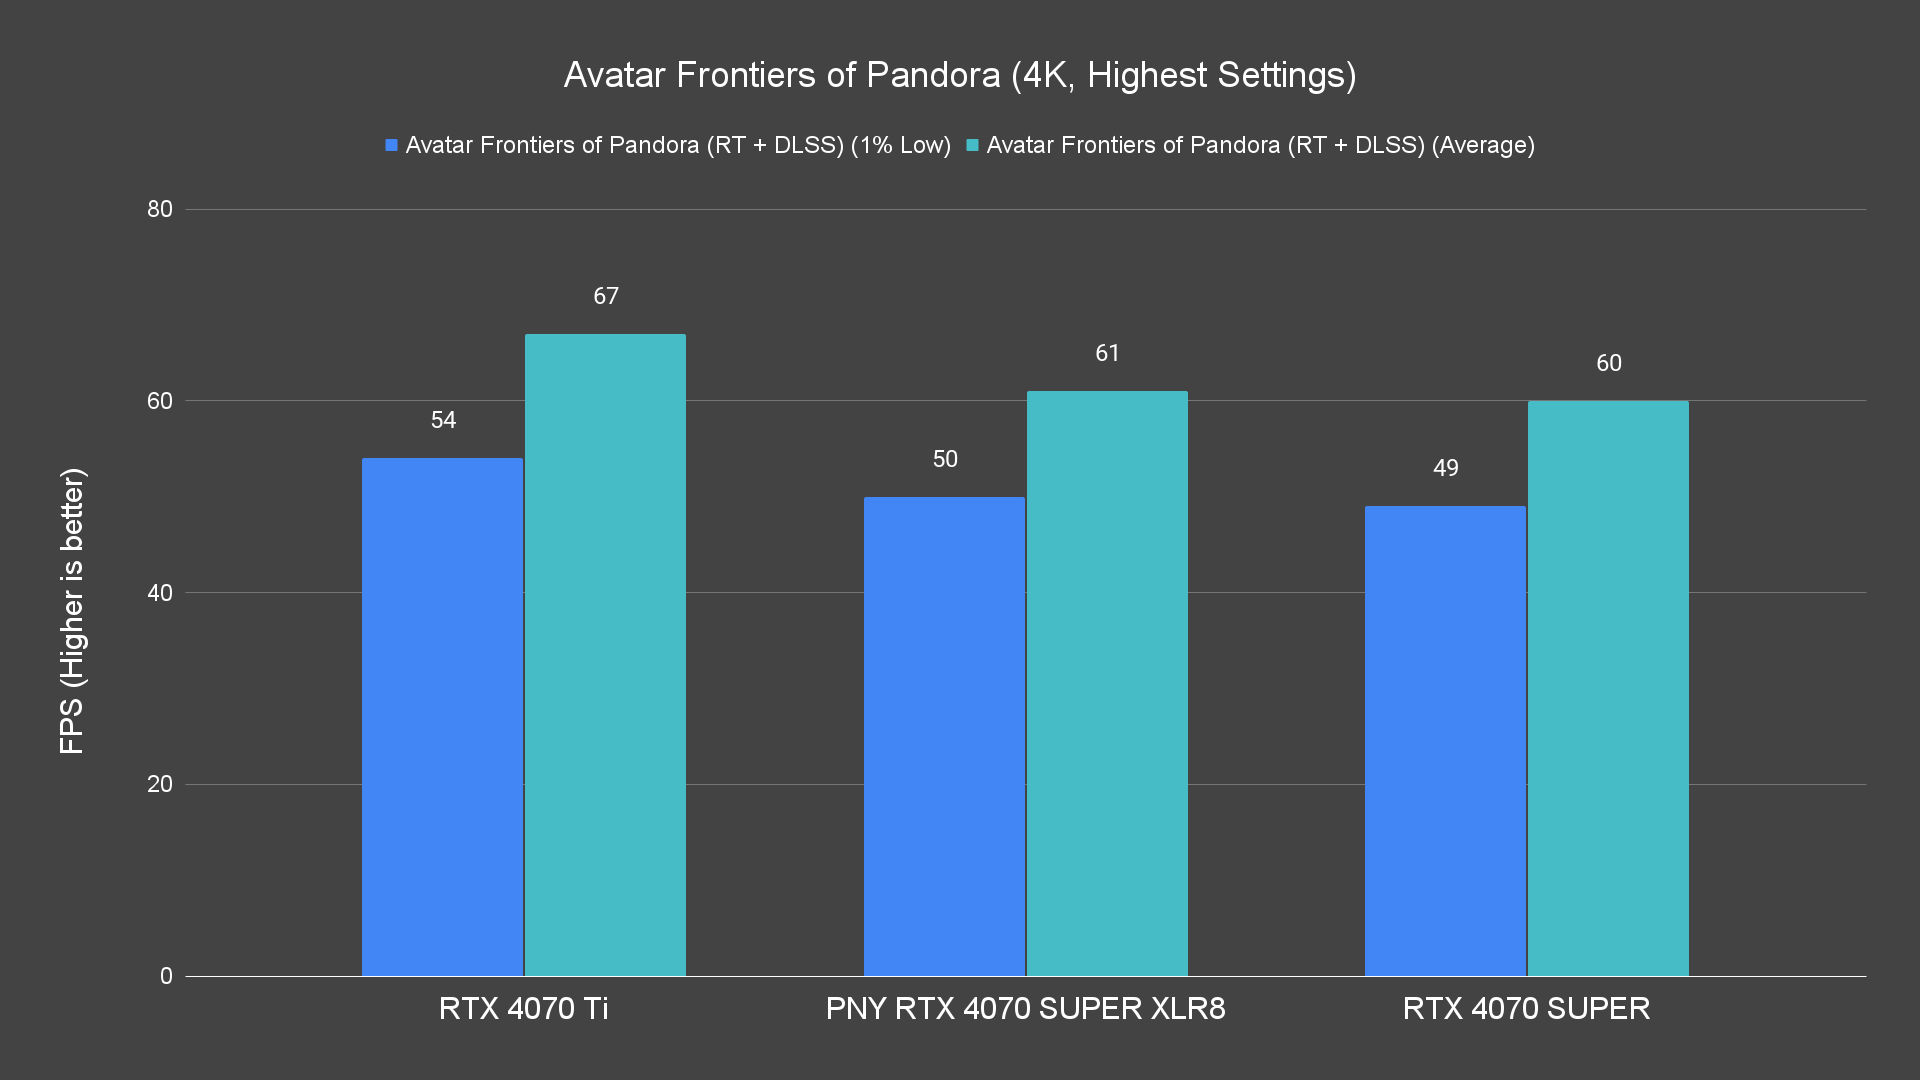 Avatar Frontiers of Pandora (4K, Highest Settings) Ray Tracing PNY RTX 4070 SUPER XLR8